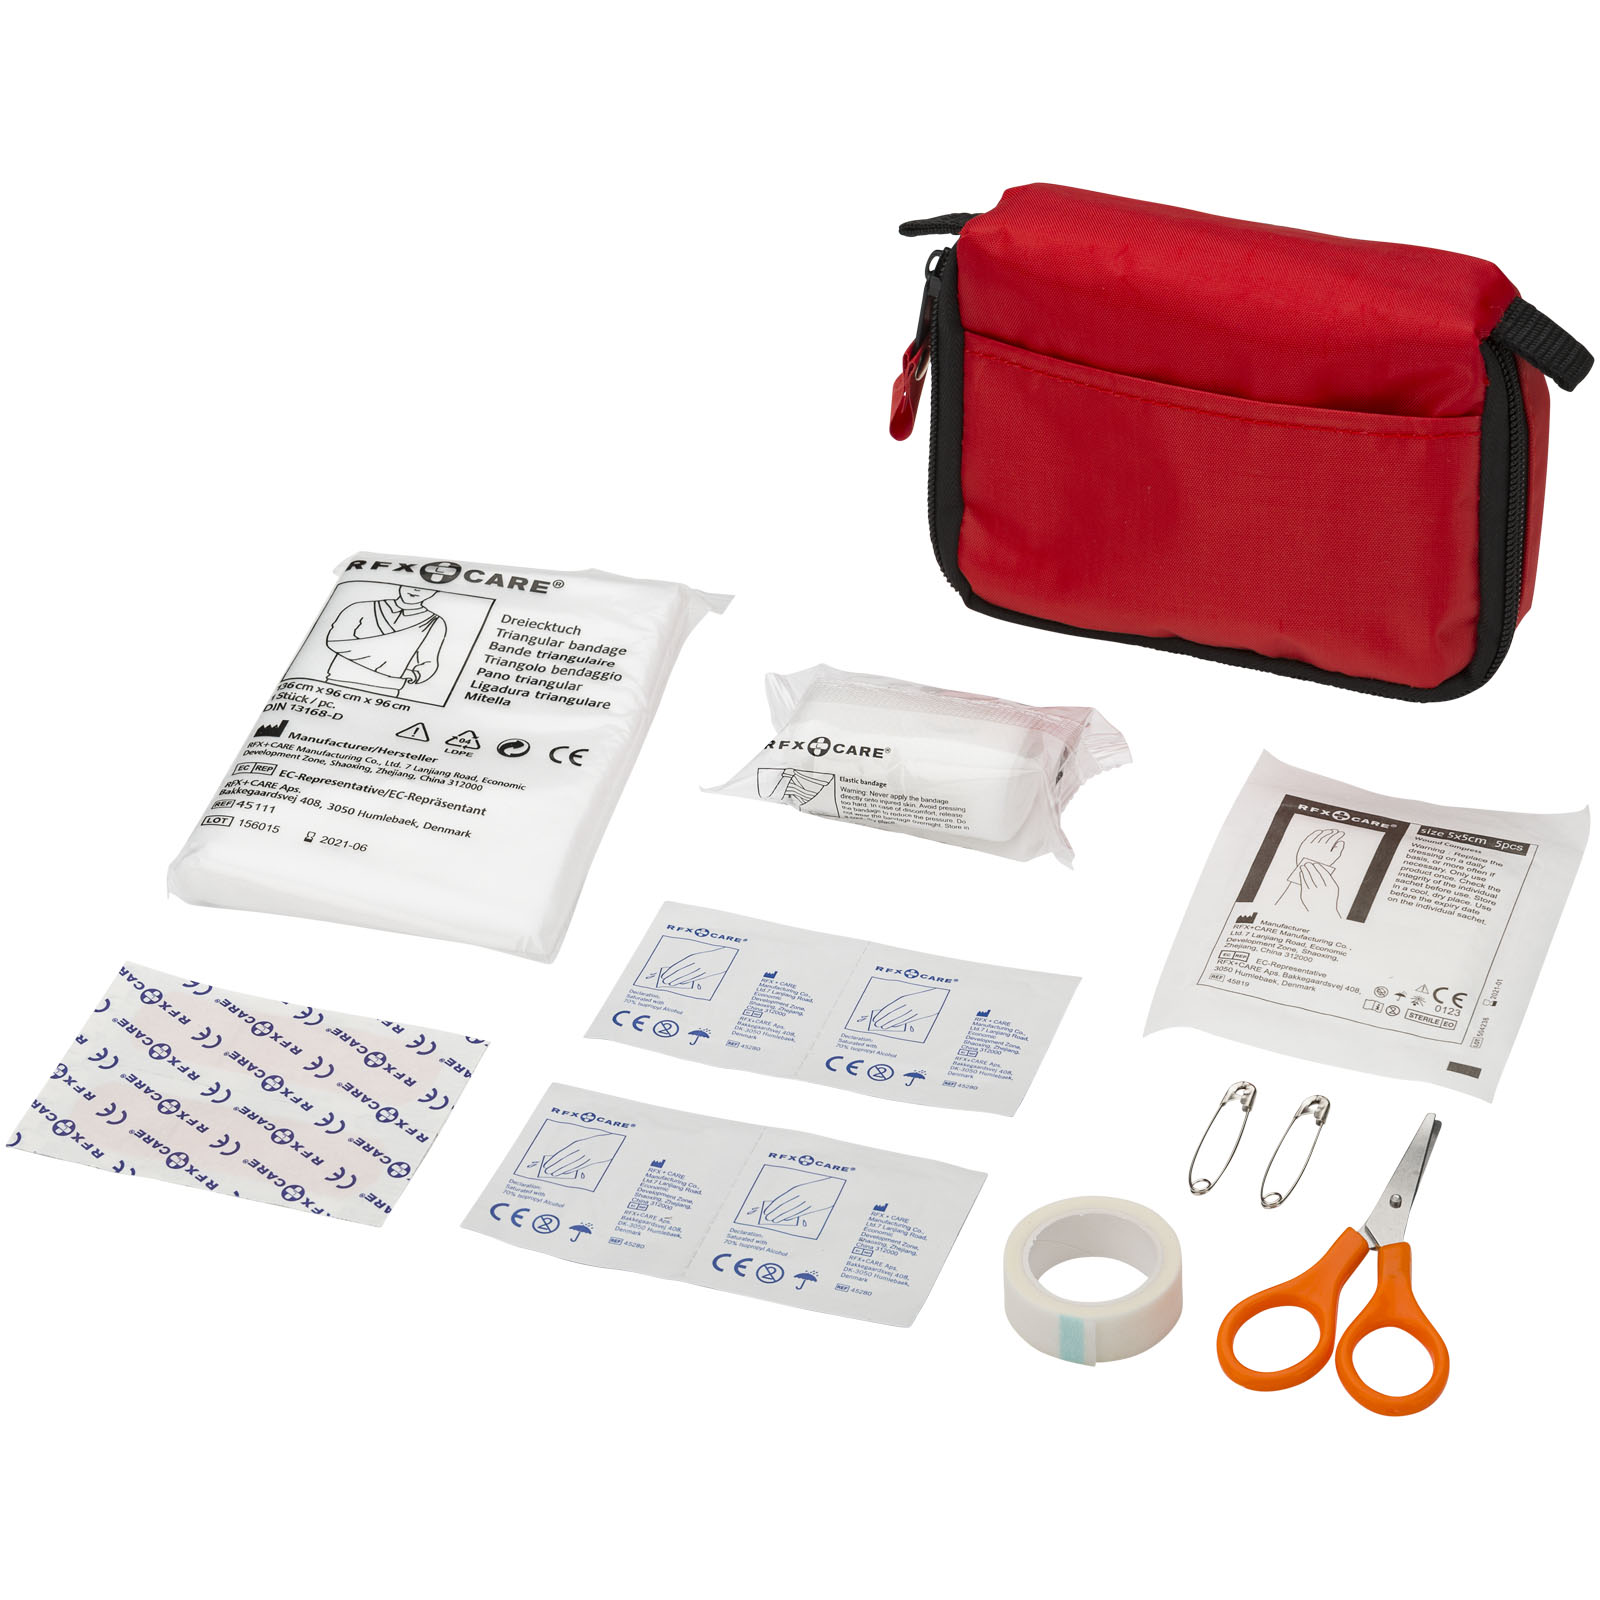 Health & Personal Care - Save-me 19-piece first aid kit